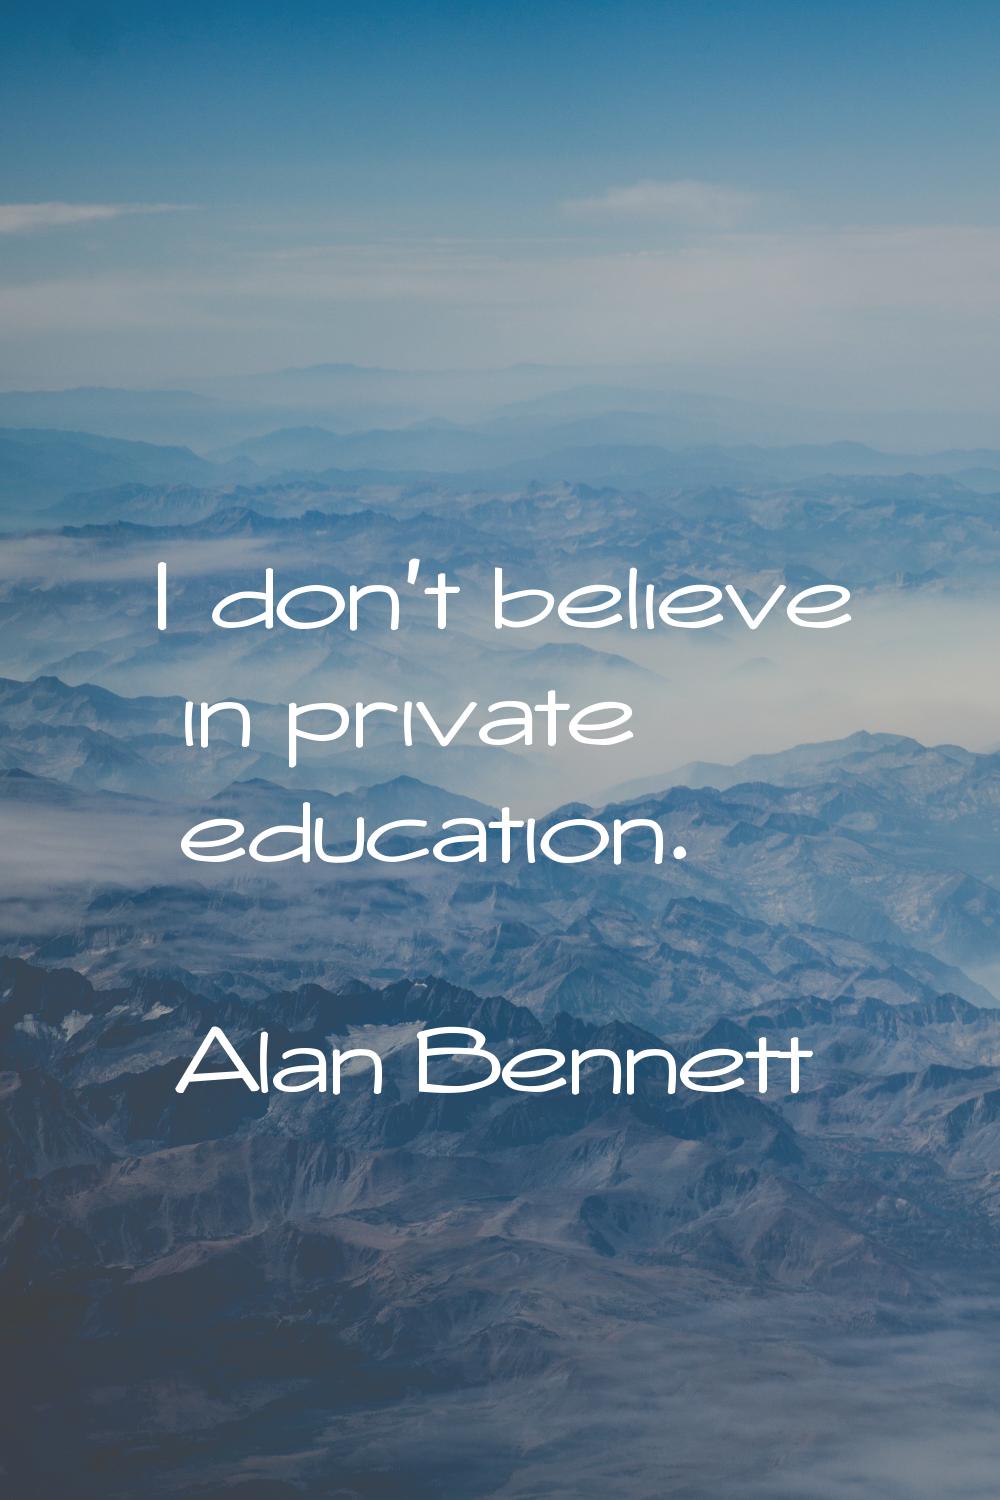 I don't believe in private education.